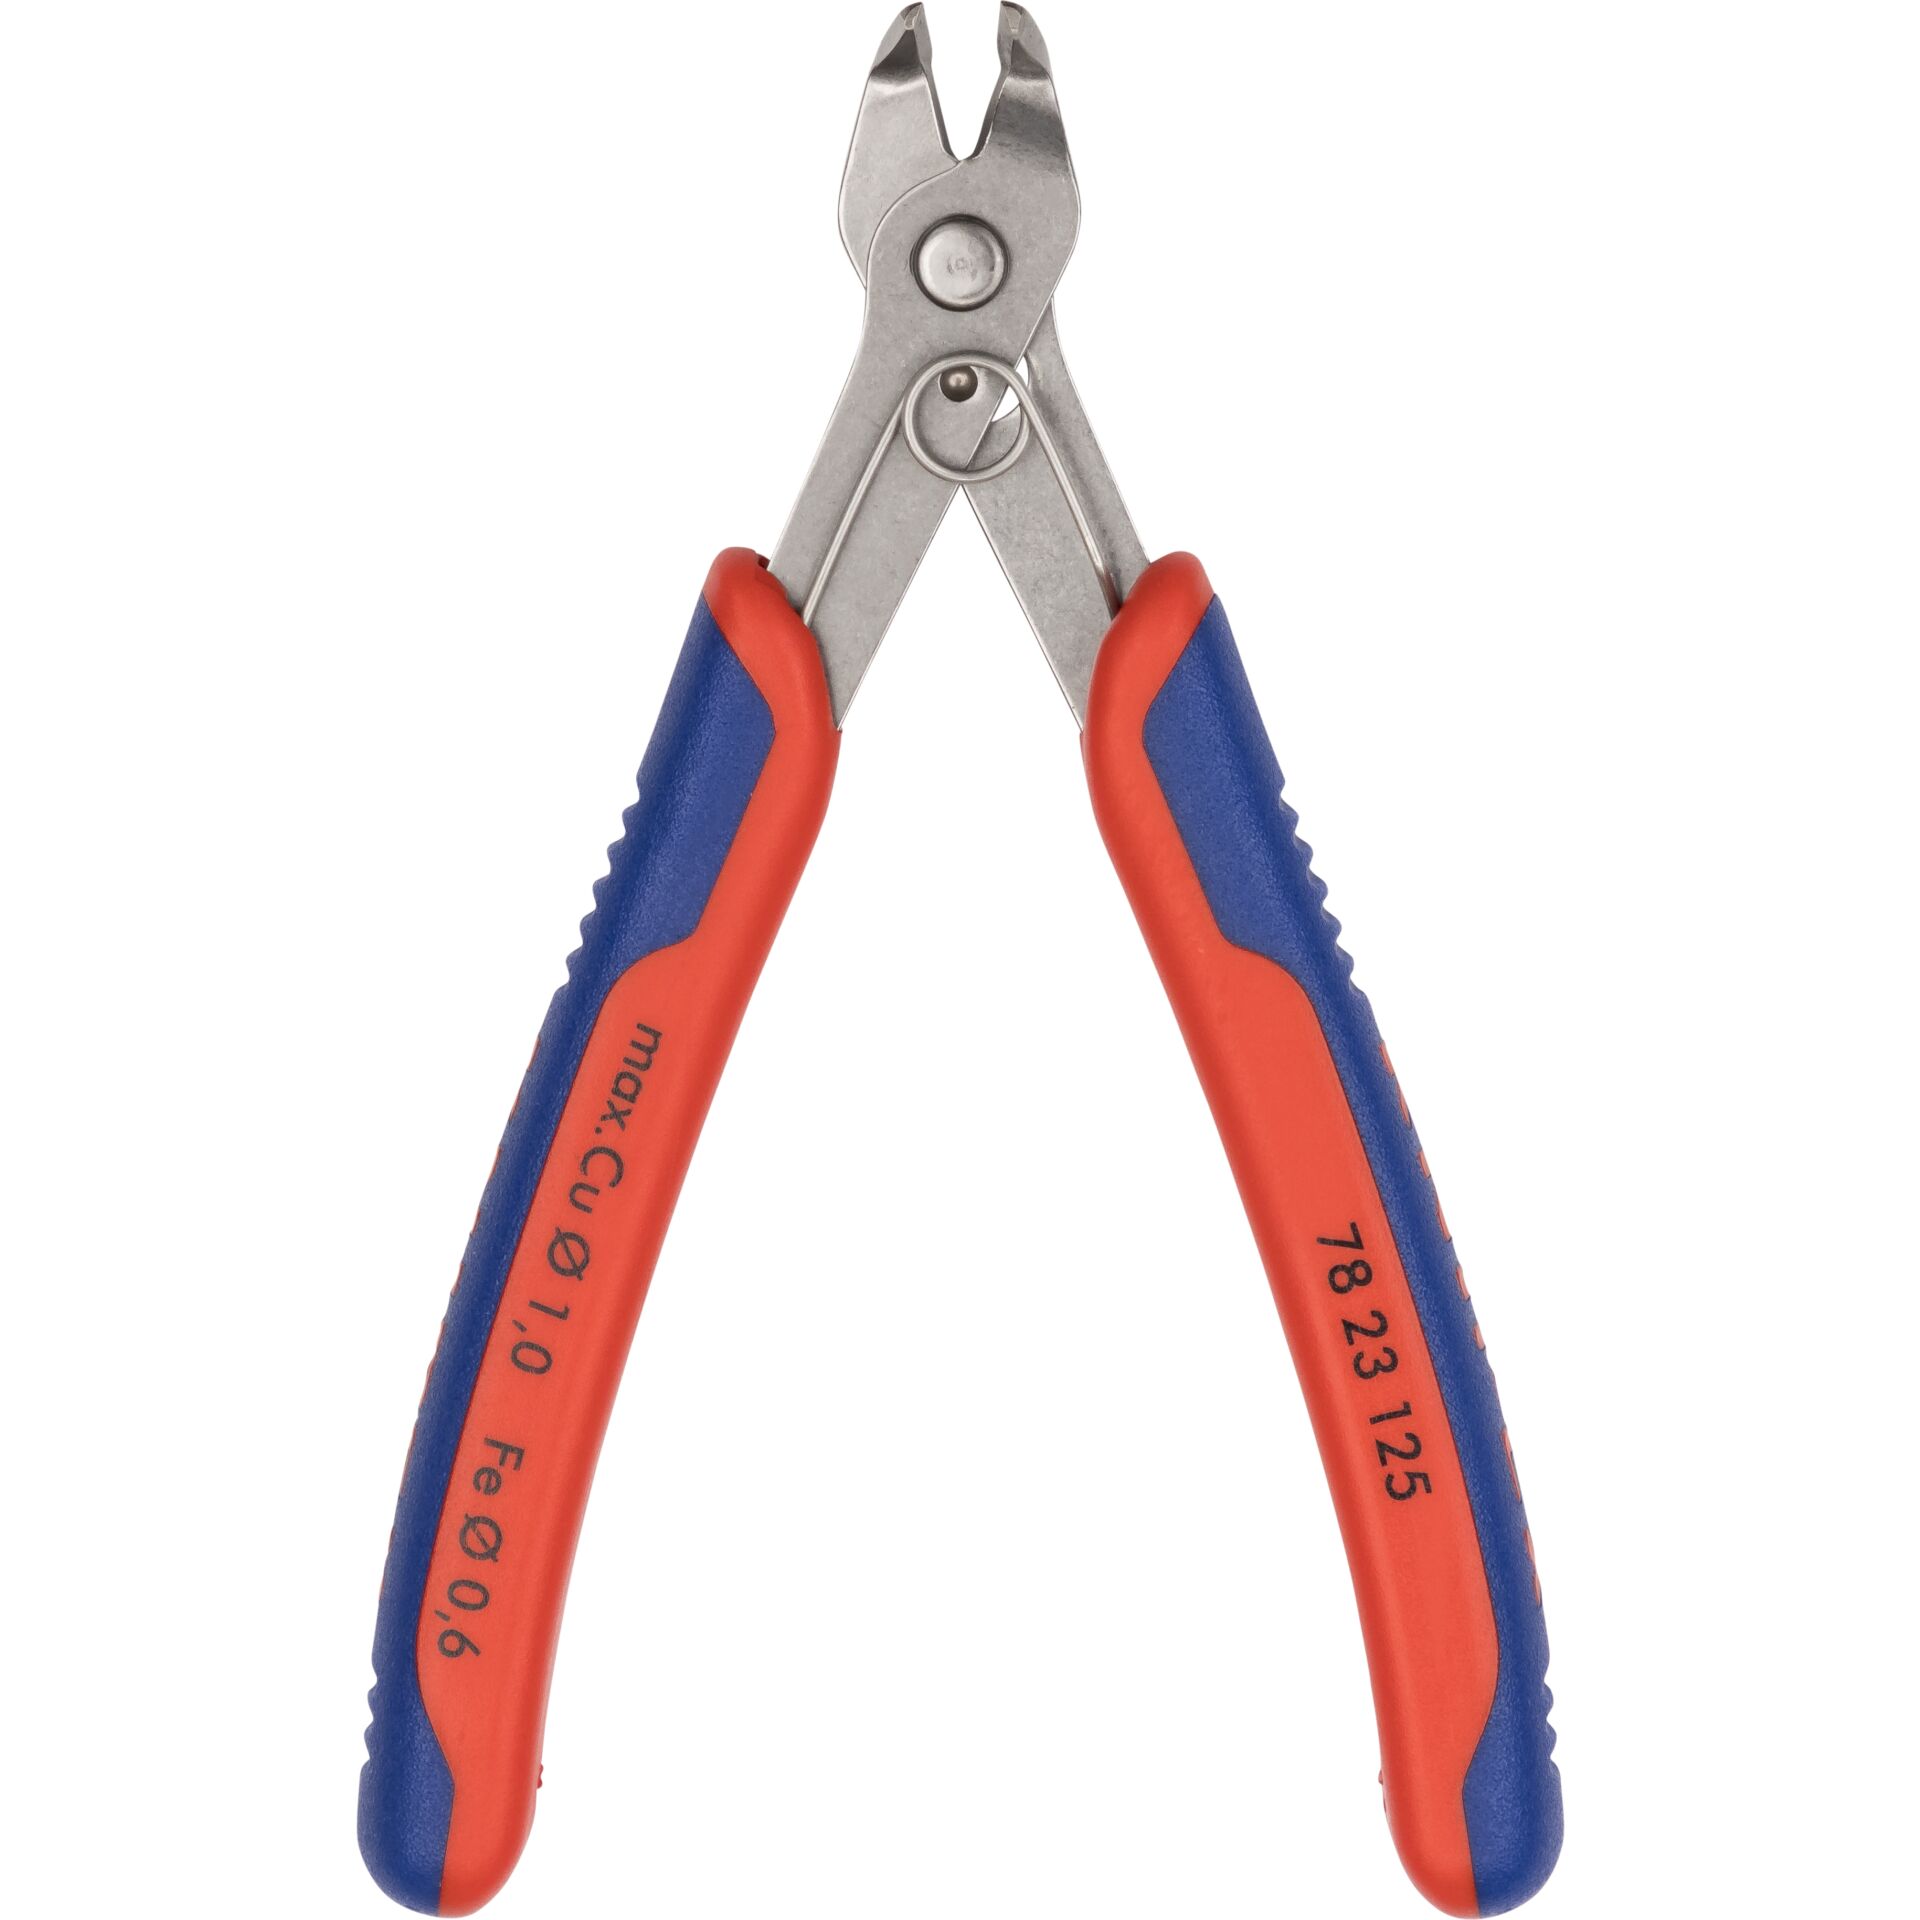 Knipex Electronic Super Knips tronchese